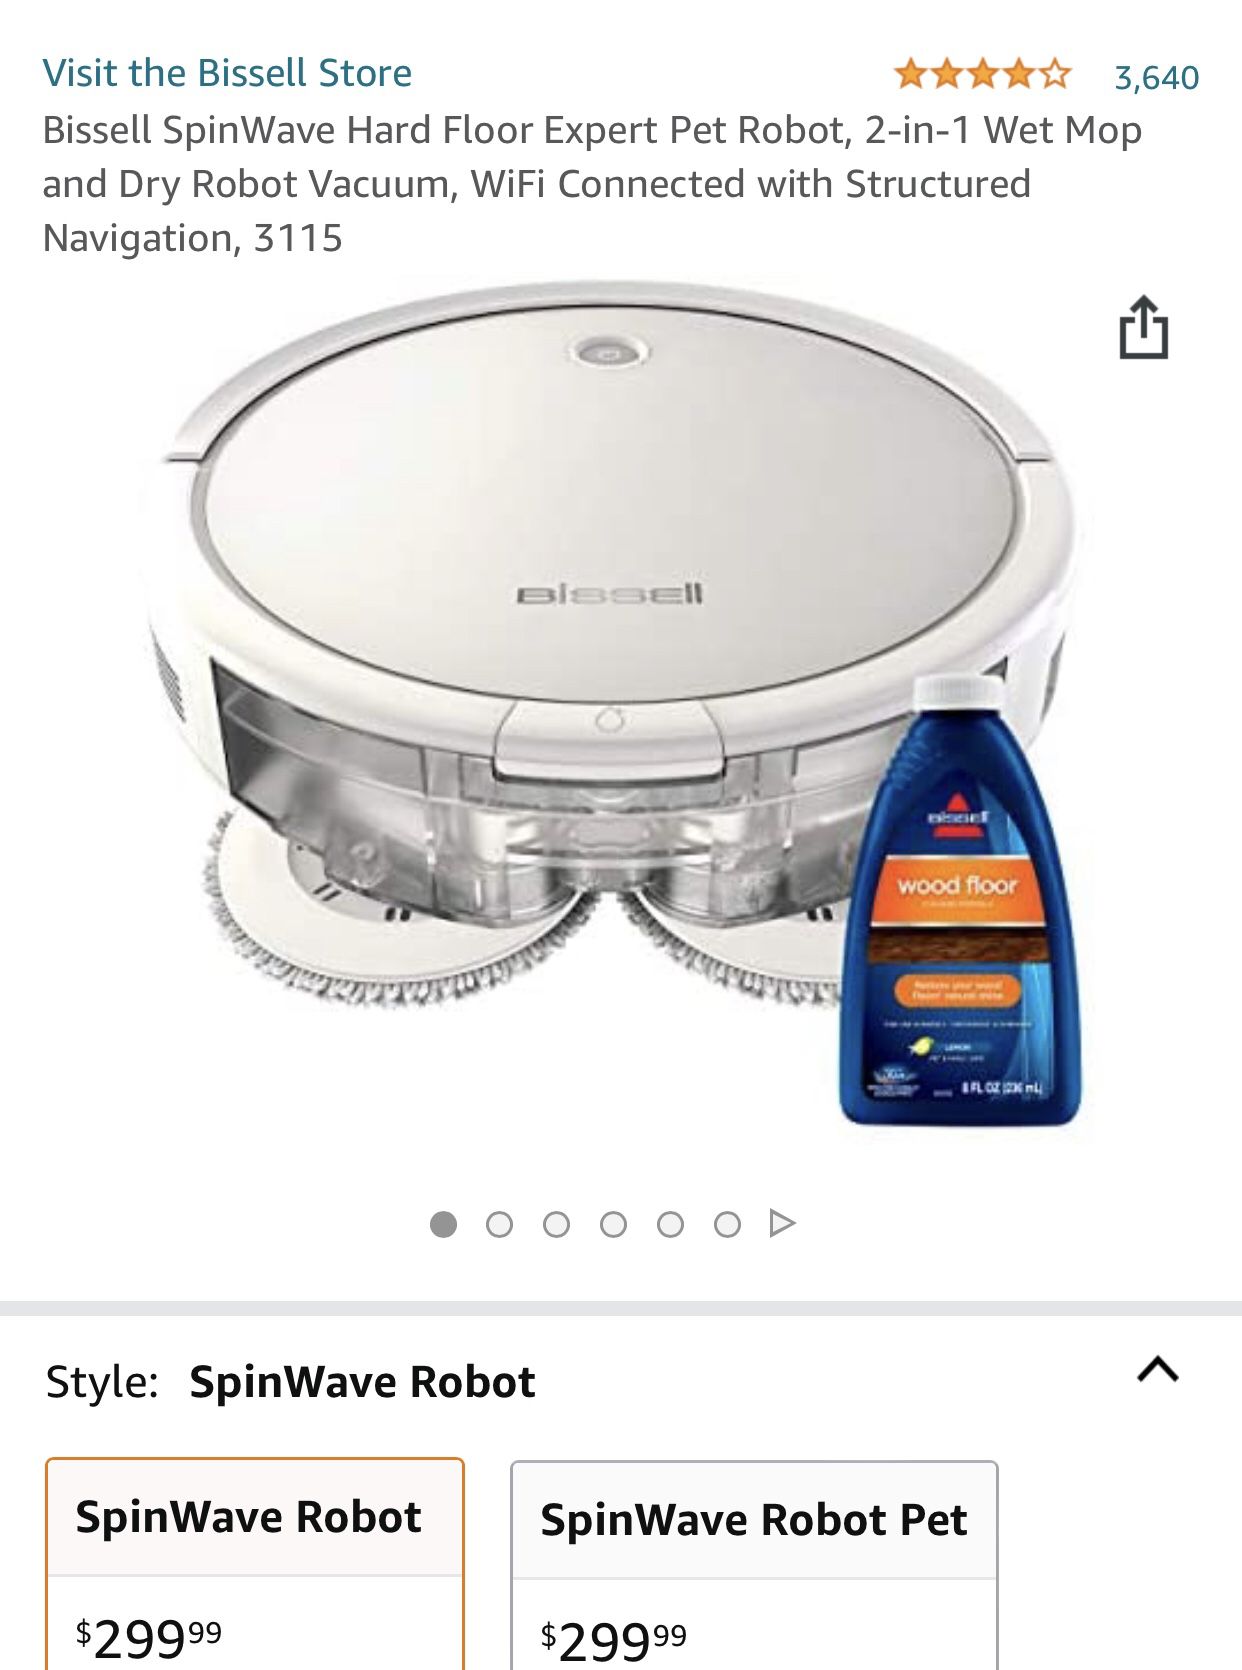 Bissell SpinWave Hard Floor Expert Pet Robot, 2-in-1 Wet Mop and Dry Robot Vacuum, WiFi Connected with Structured Navigation